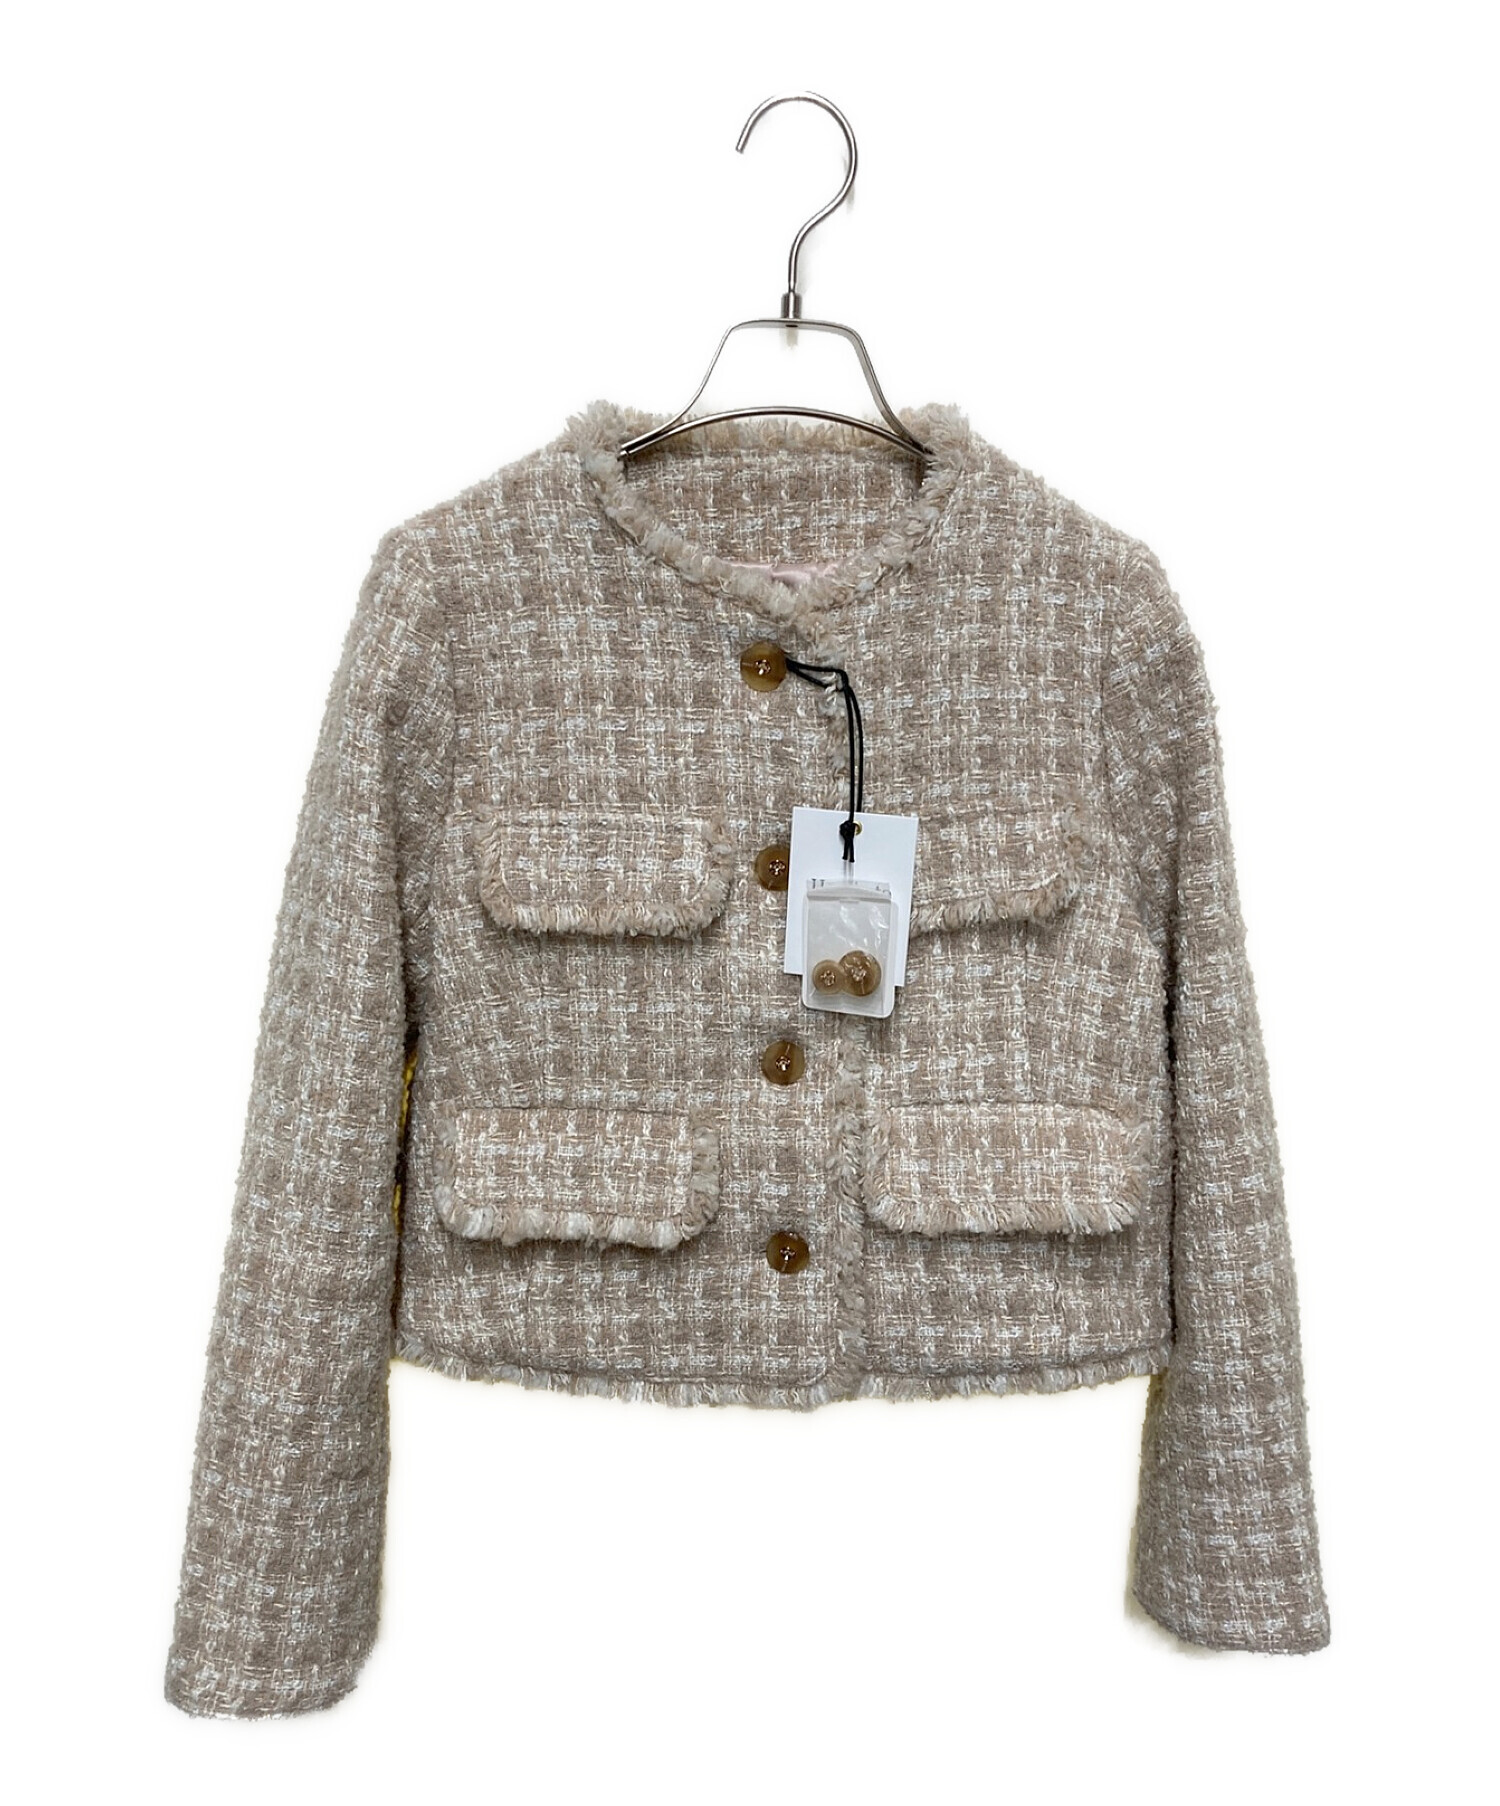 Her lip to Wool-Blend Fancy Tweed Jacket2022年に購入しました